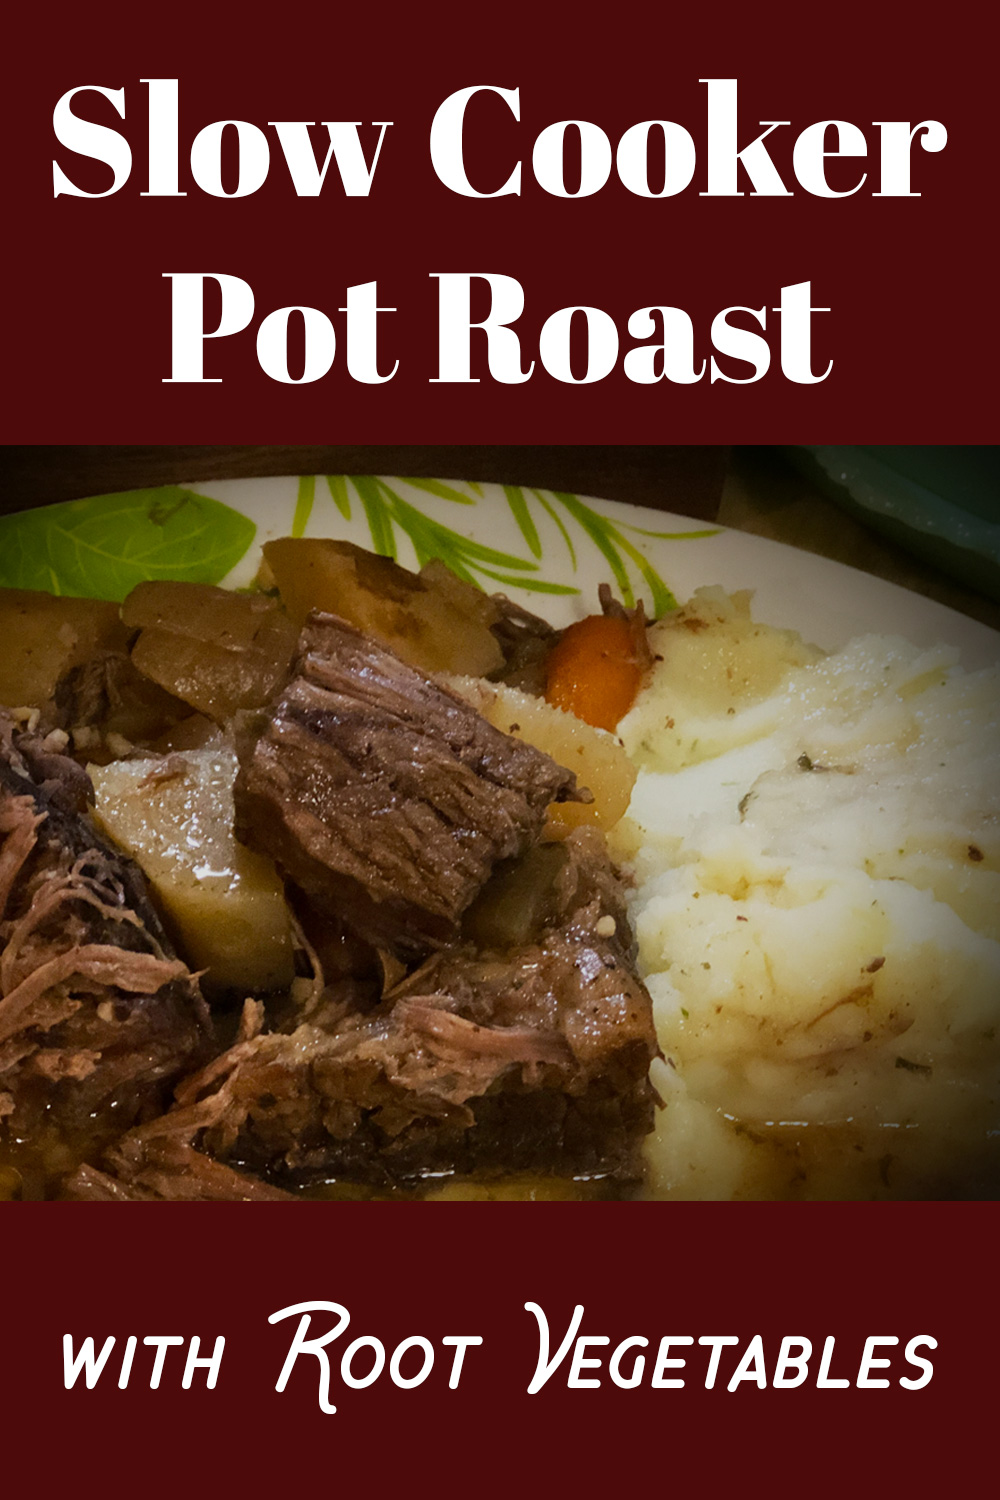 Slow Cooker Pot Roast with Root Vegetables